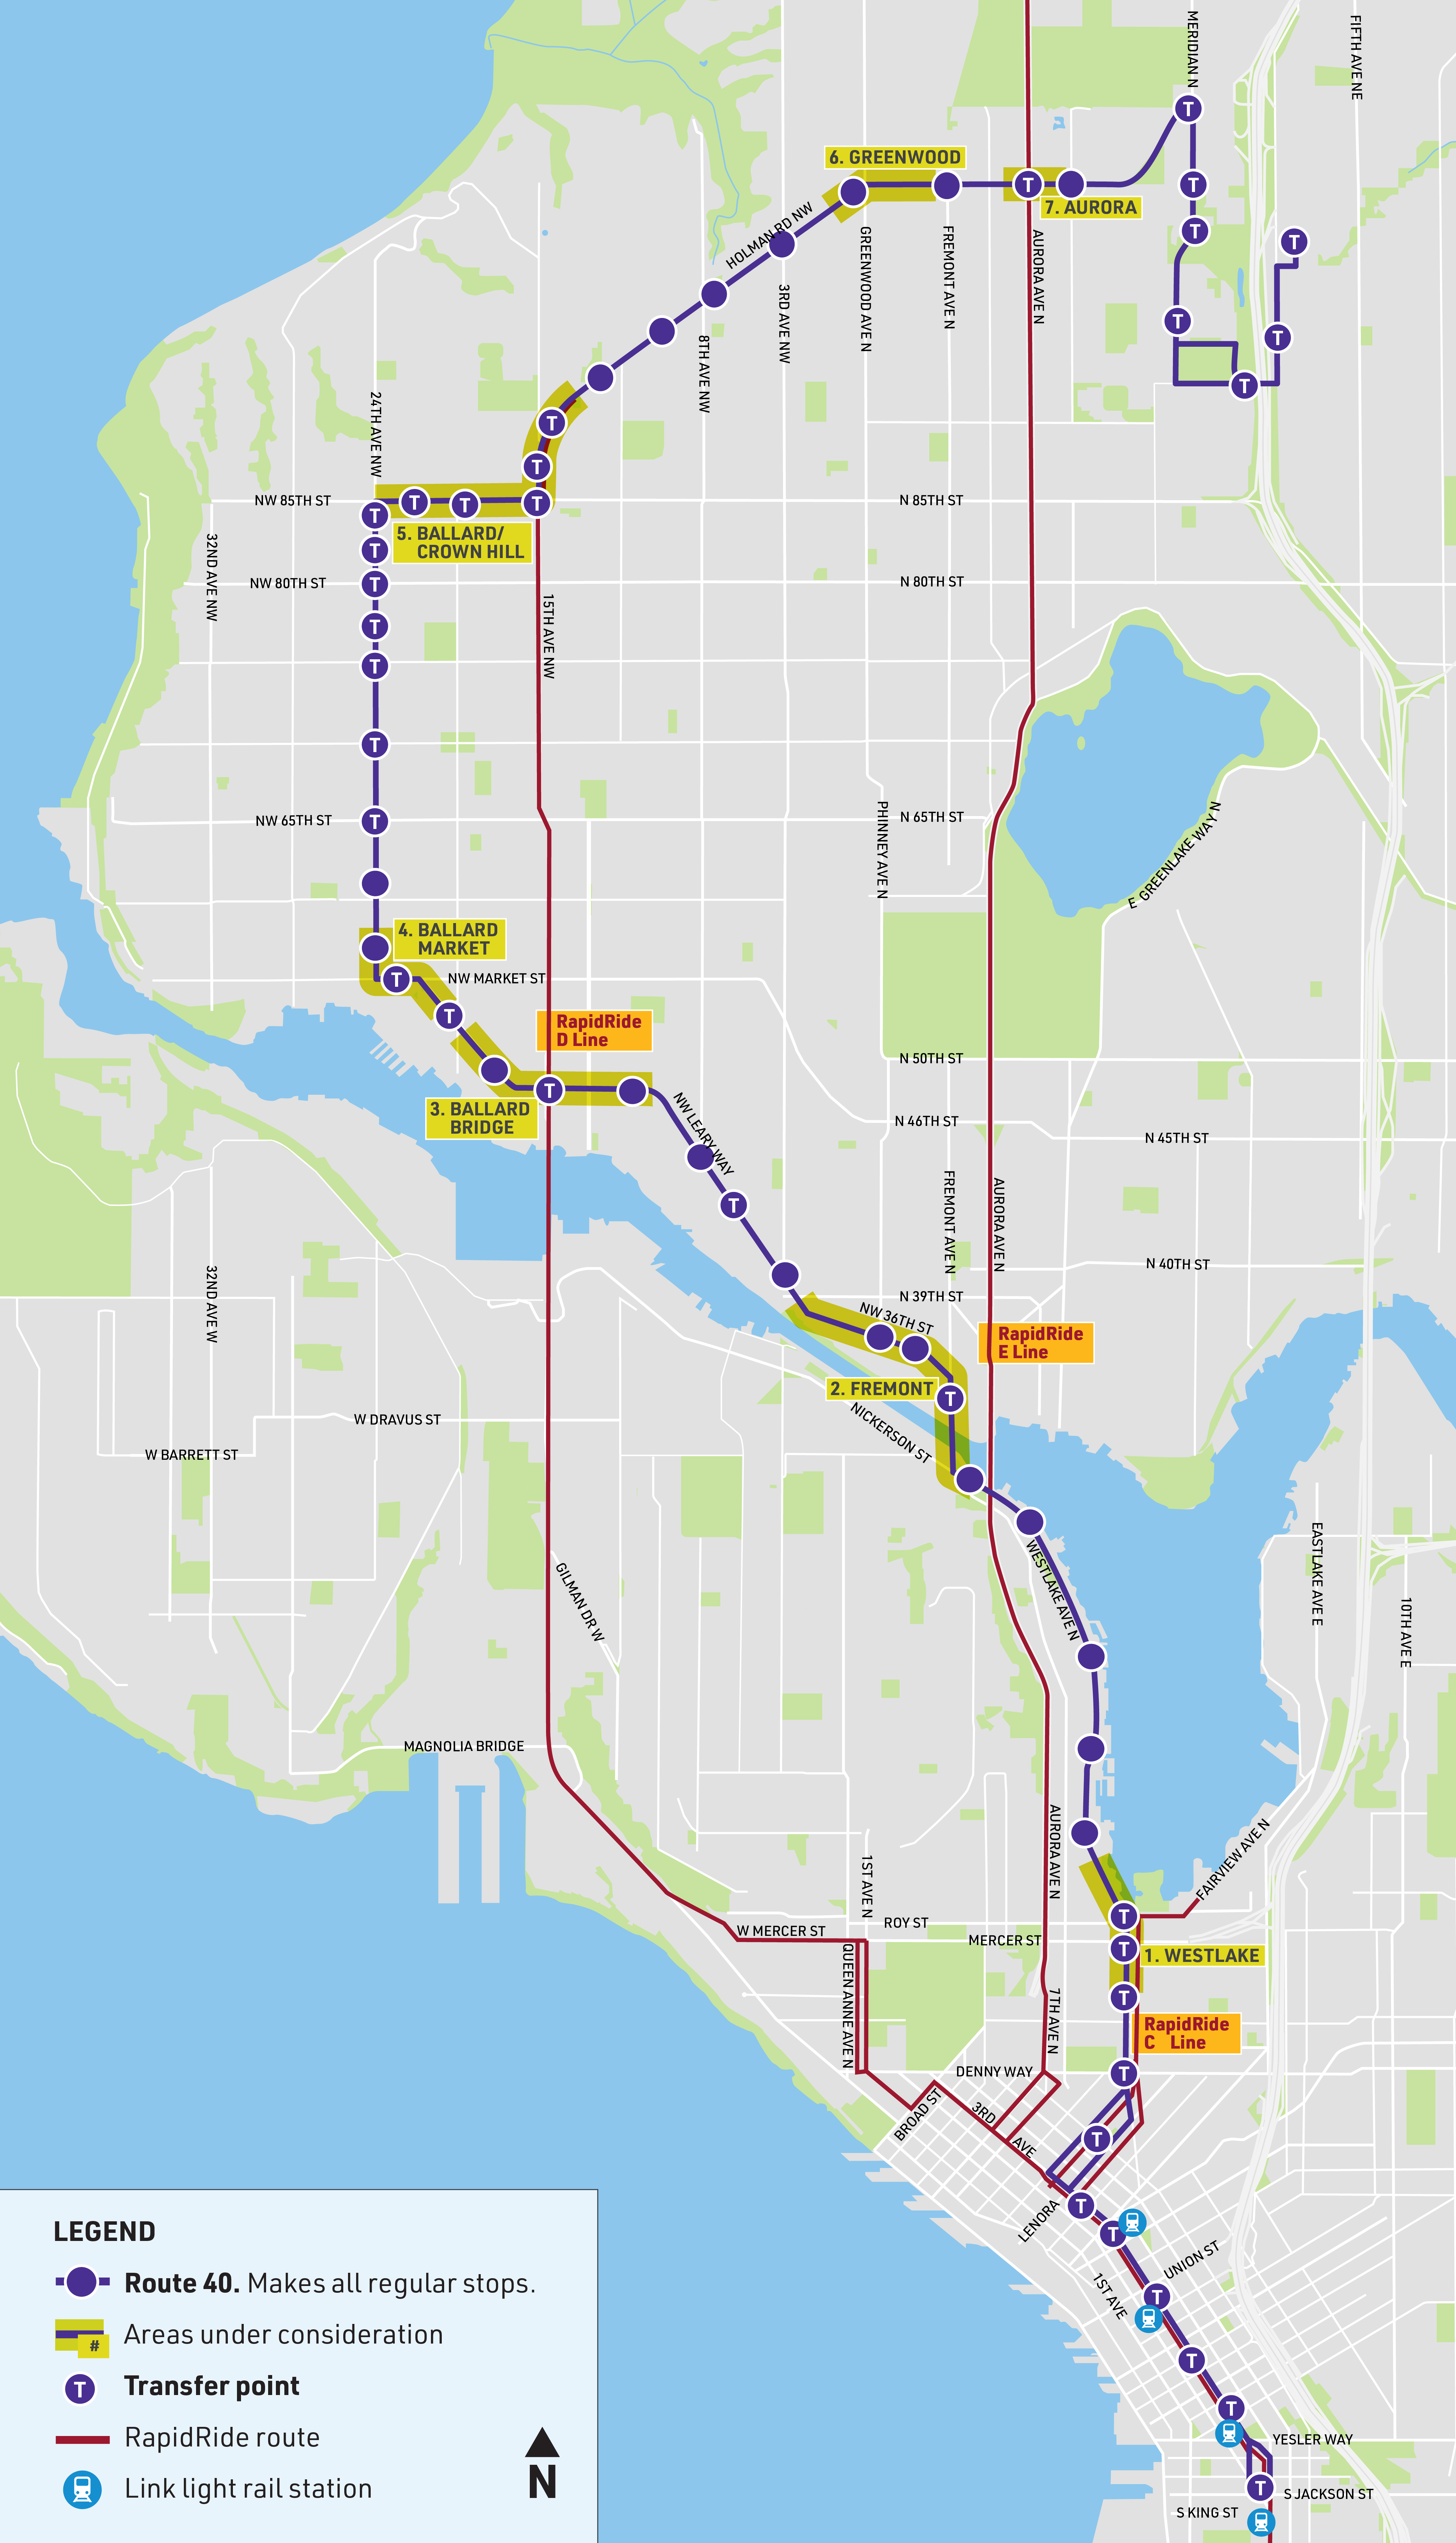 Route 40 has a question mark shape serving the Downtown core and looping to Ballard before swooping up and over to Northgate. (SDOT)